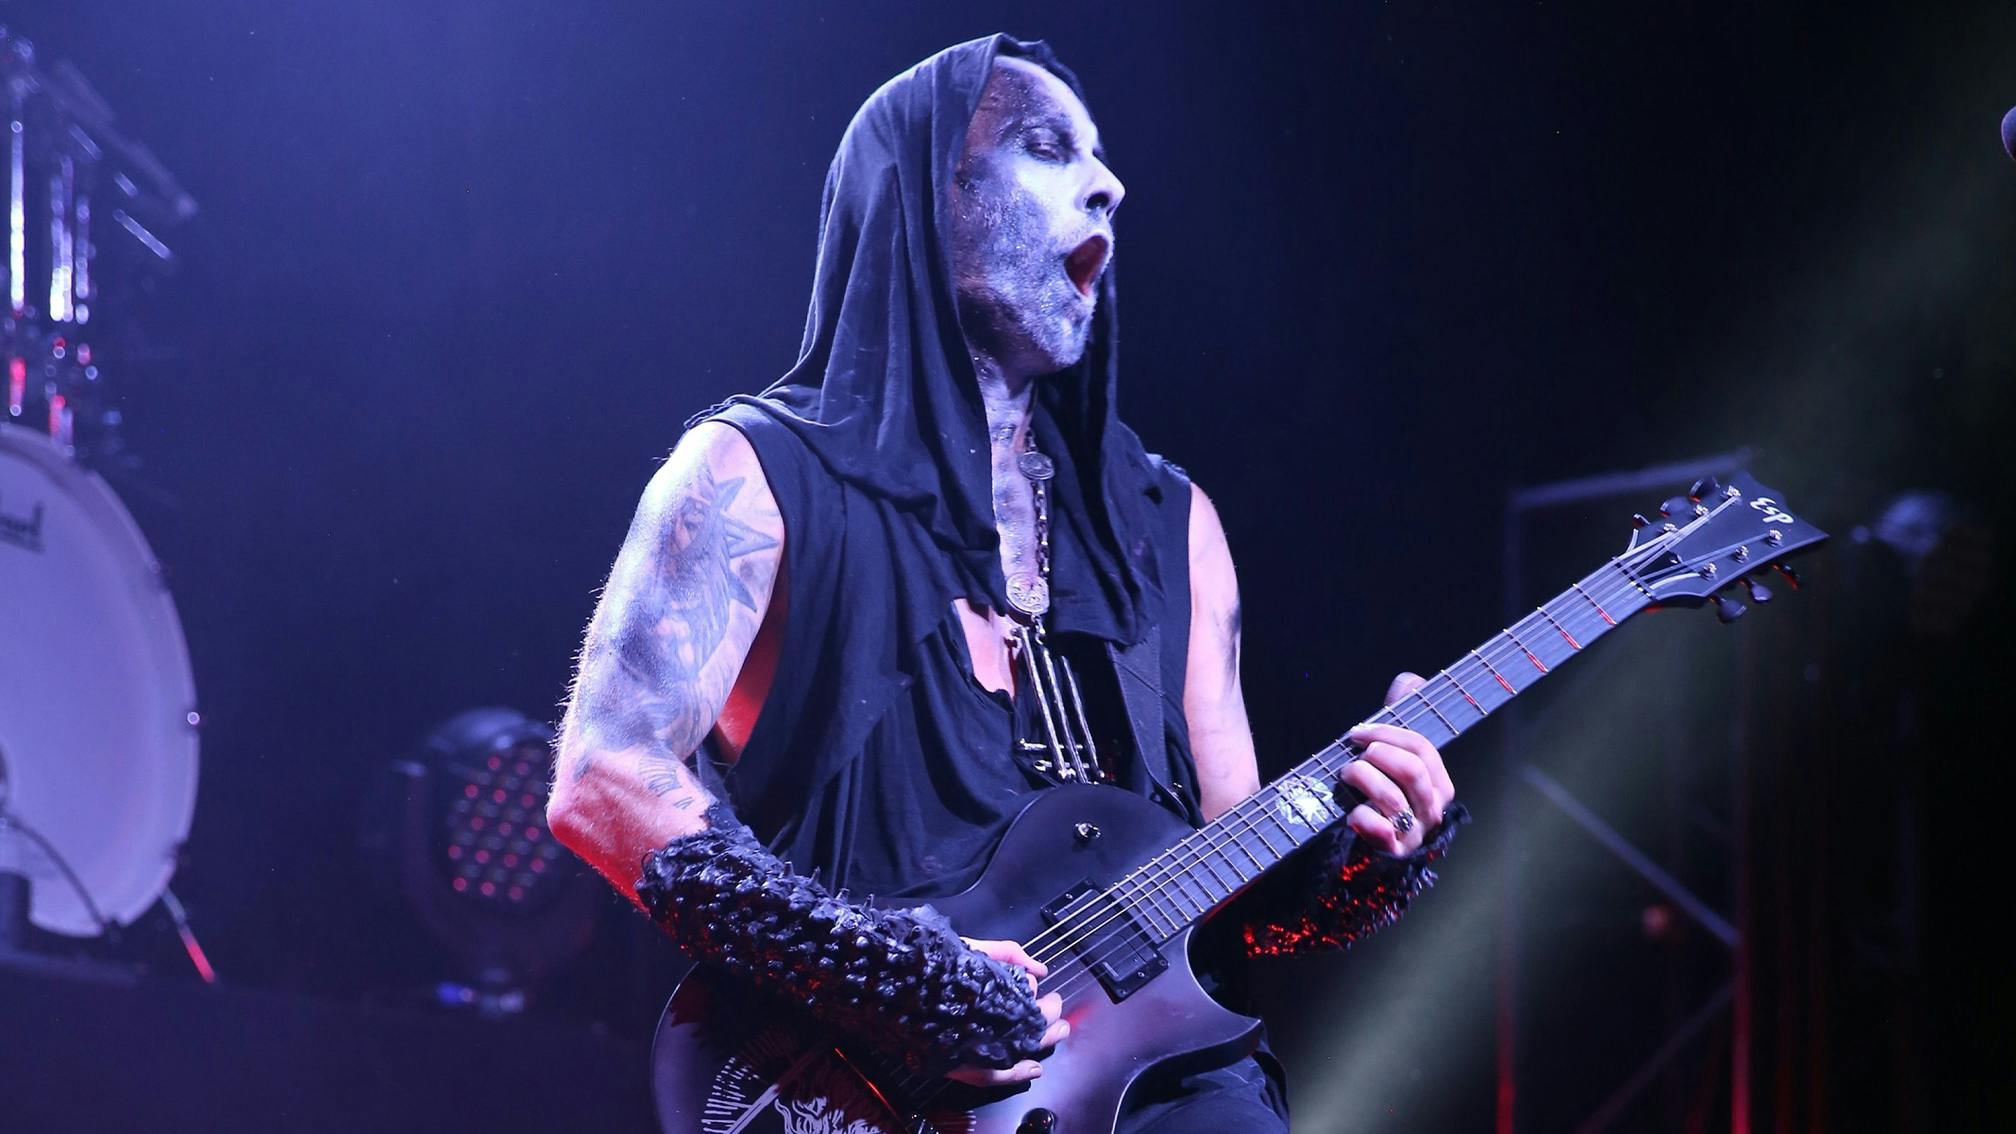 Behemoth's Nergal has been found guilty of “offending religious feelings” by a court in Poland